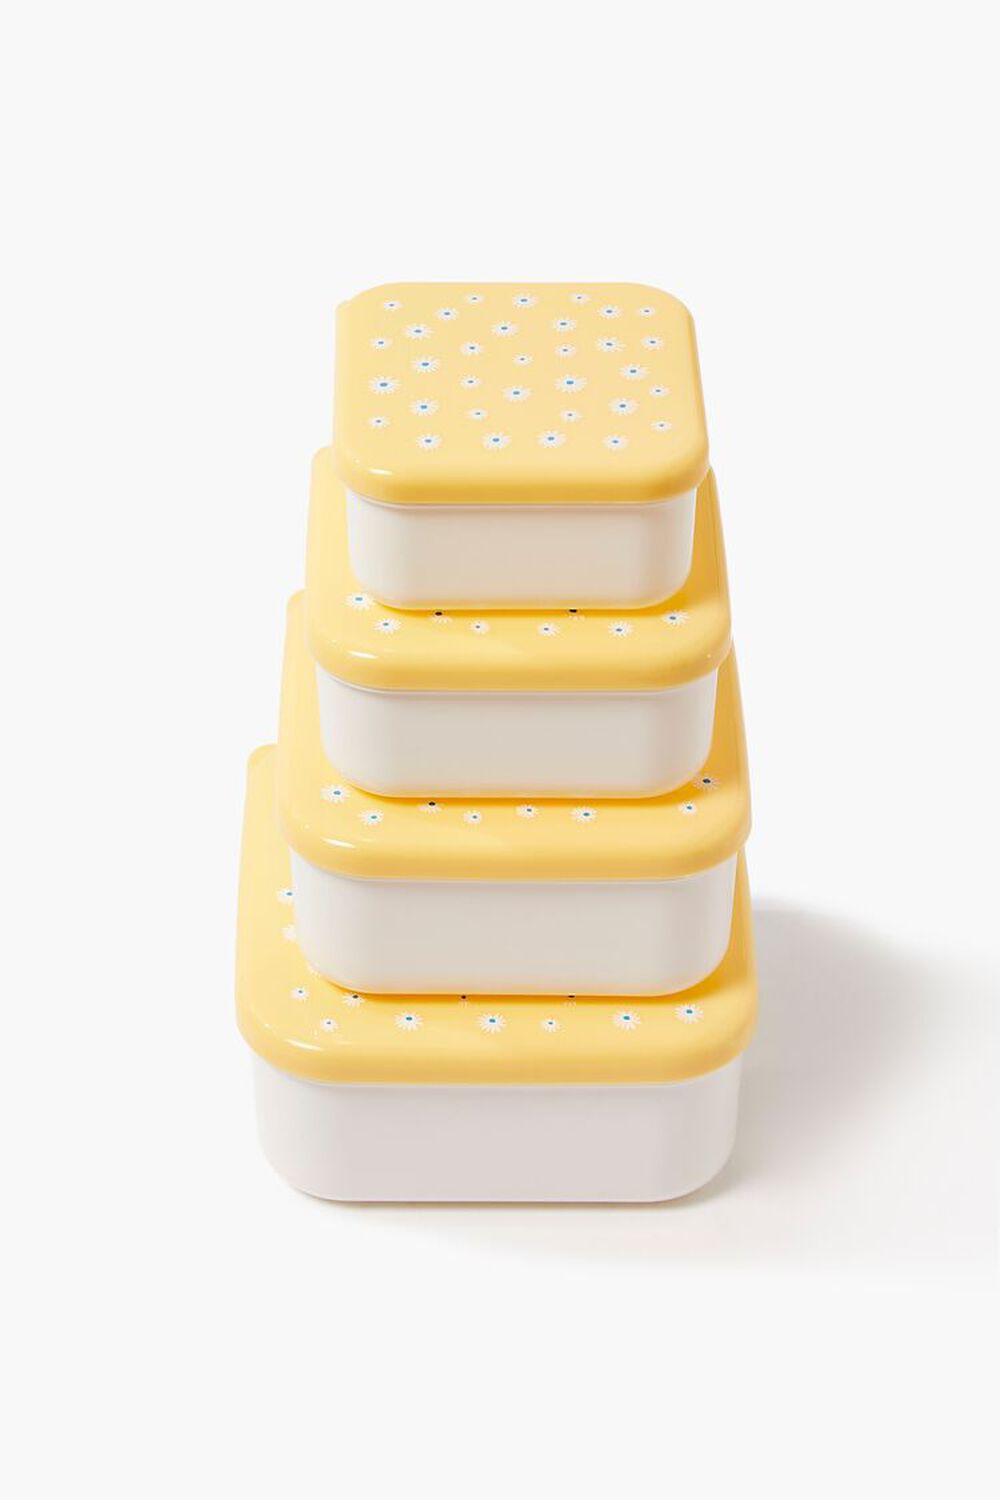 YELLOW Floral Print Food Storage Container Set, image 1